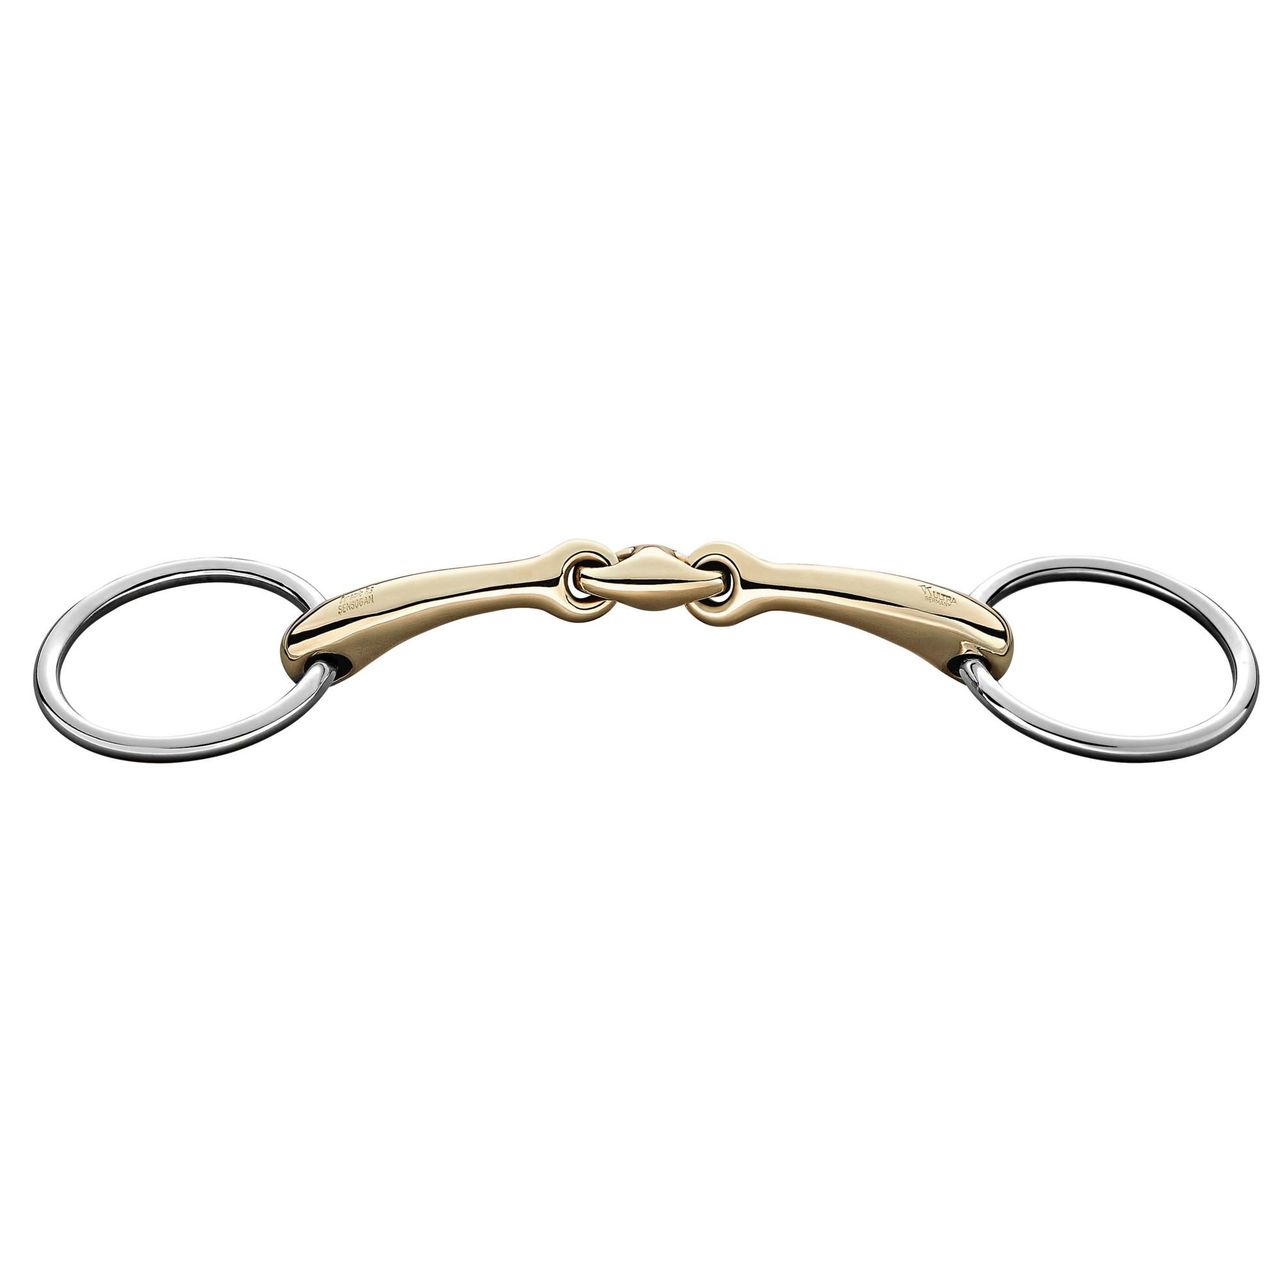 Sprenger - Dynamic RS Double Jointed Loose Ring Bradoon - 14 mm